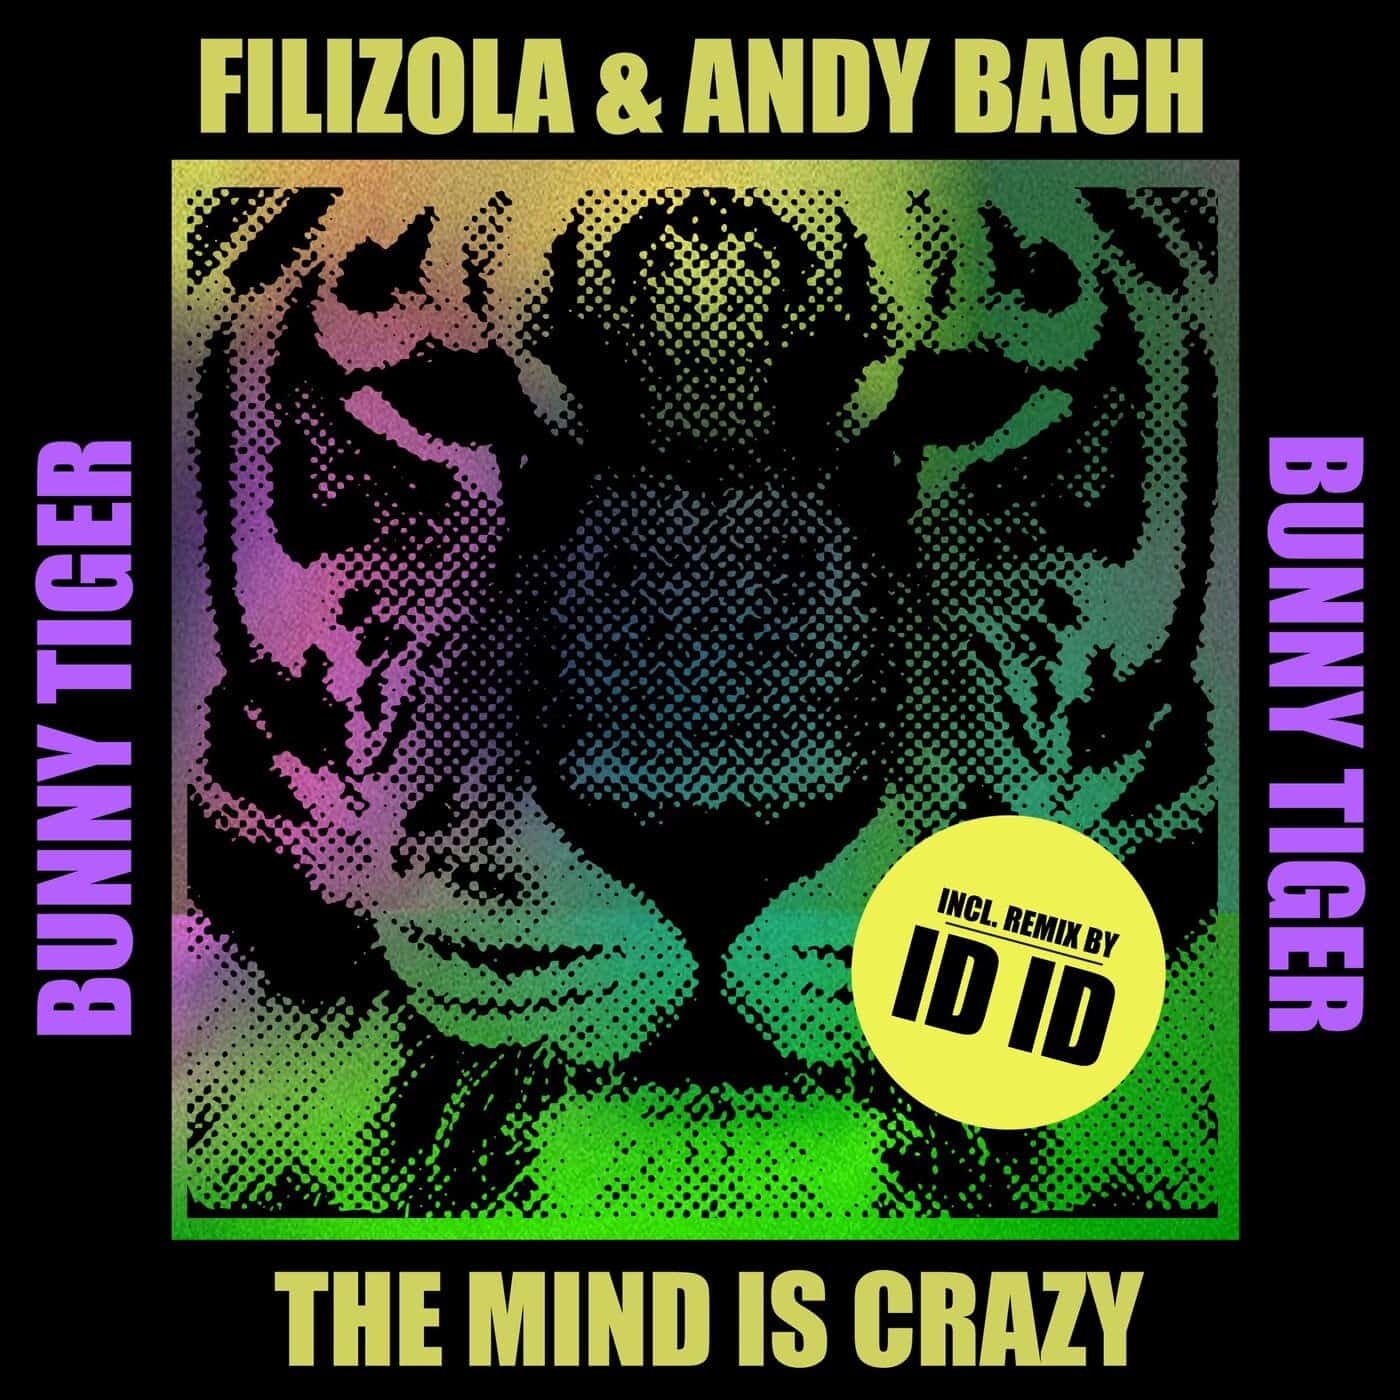 Download Andy Bach, Filizola - The Mind Is Crazy on Electrobuzz